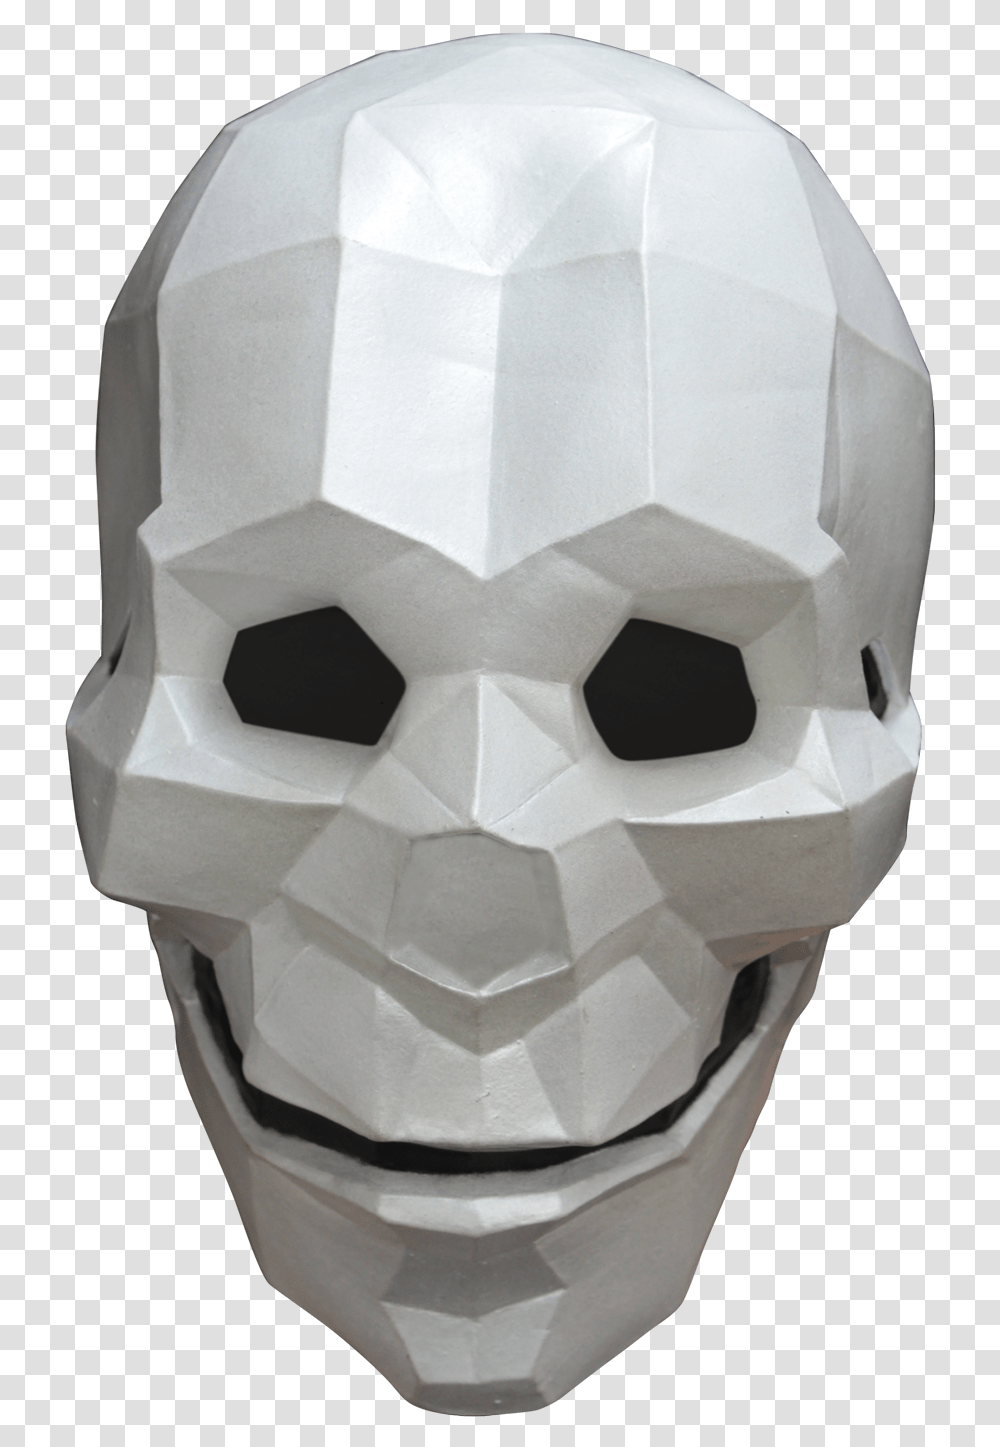 Low Poly Skull Skull Low Poly Mask, Soccer Ball, Sport, Sports, Sphere Transparent Png